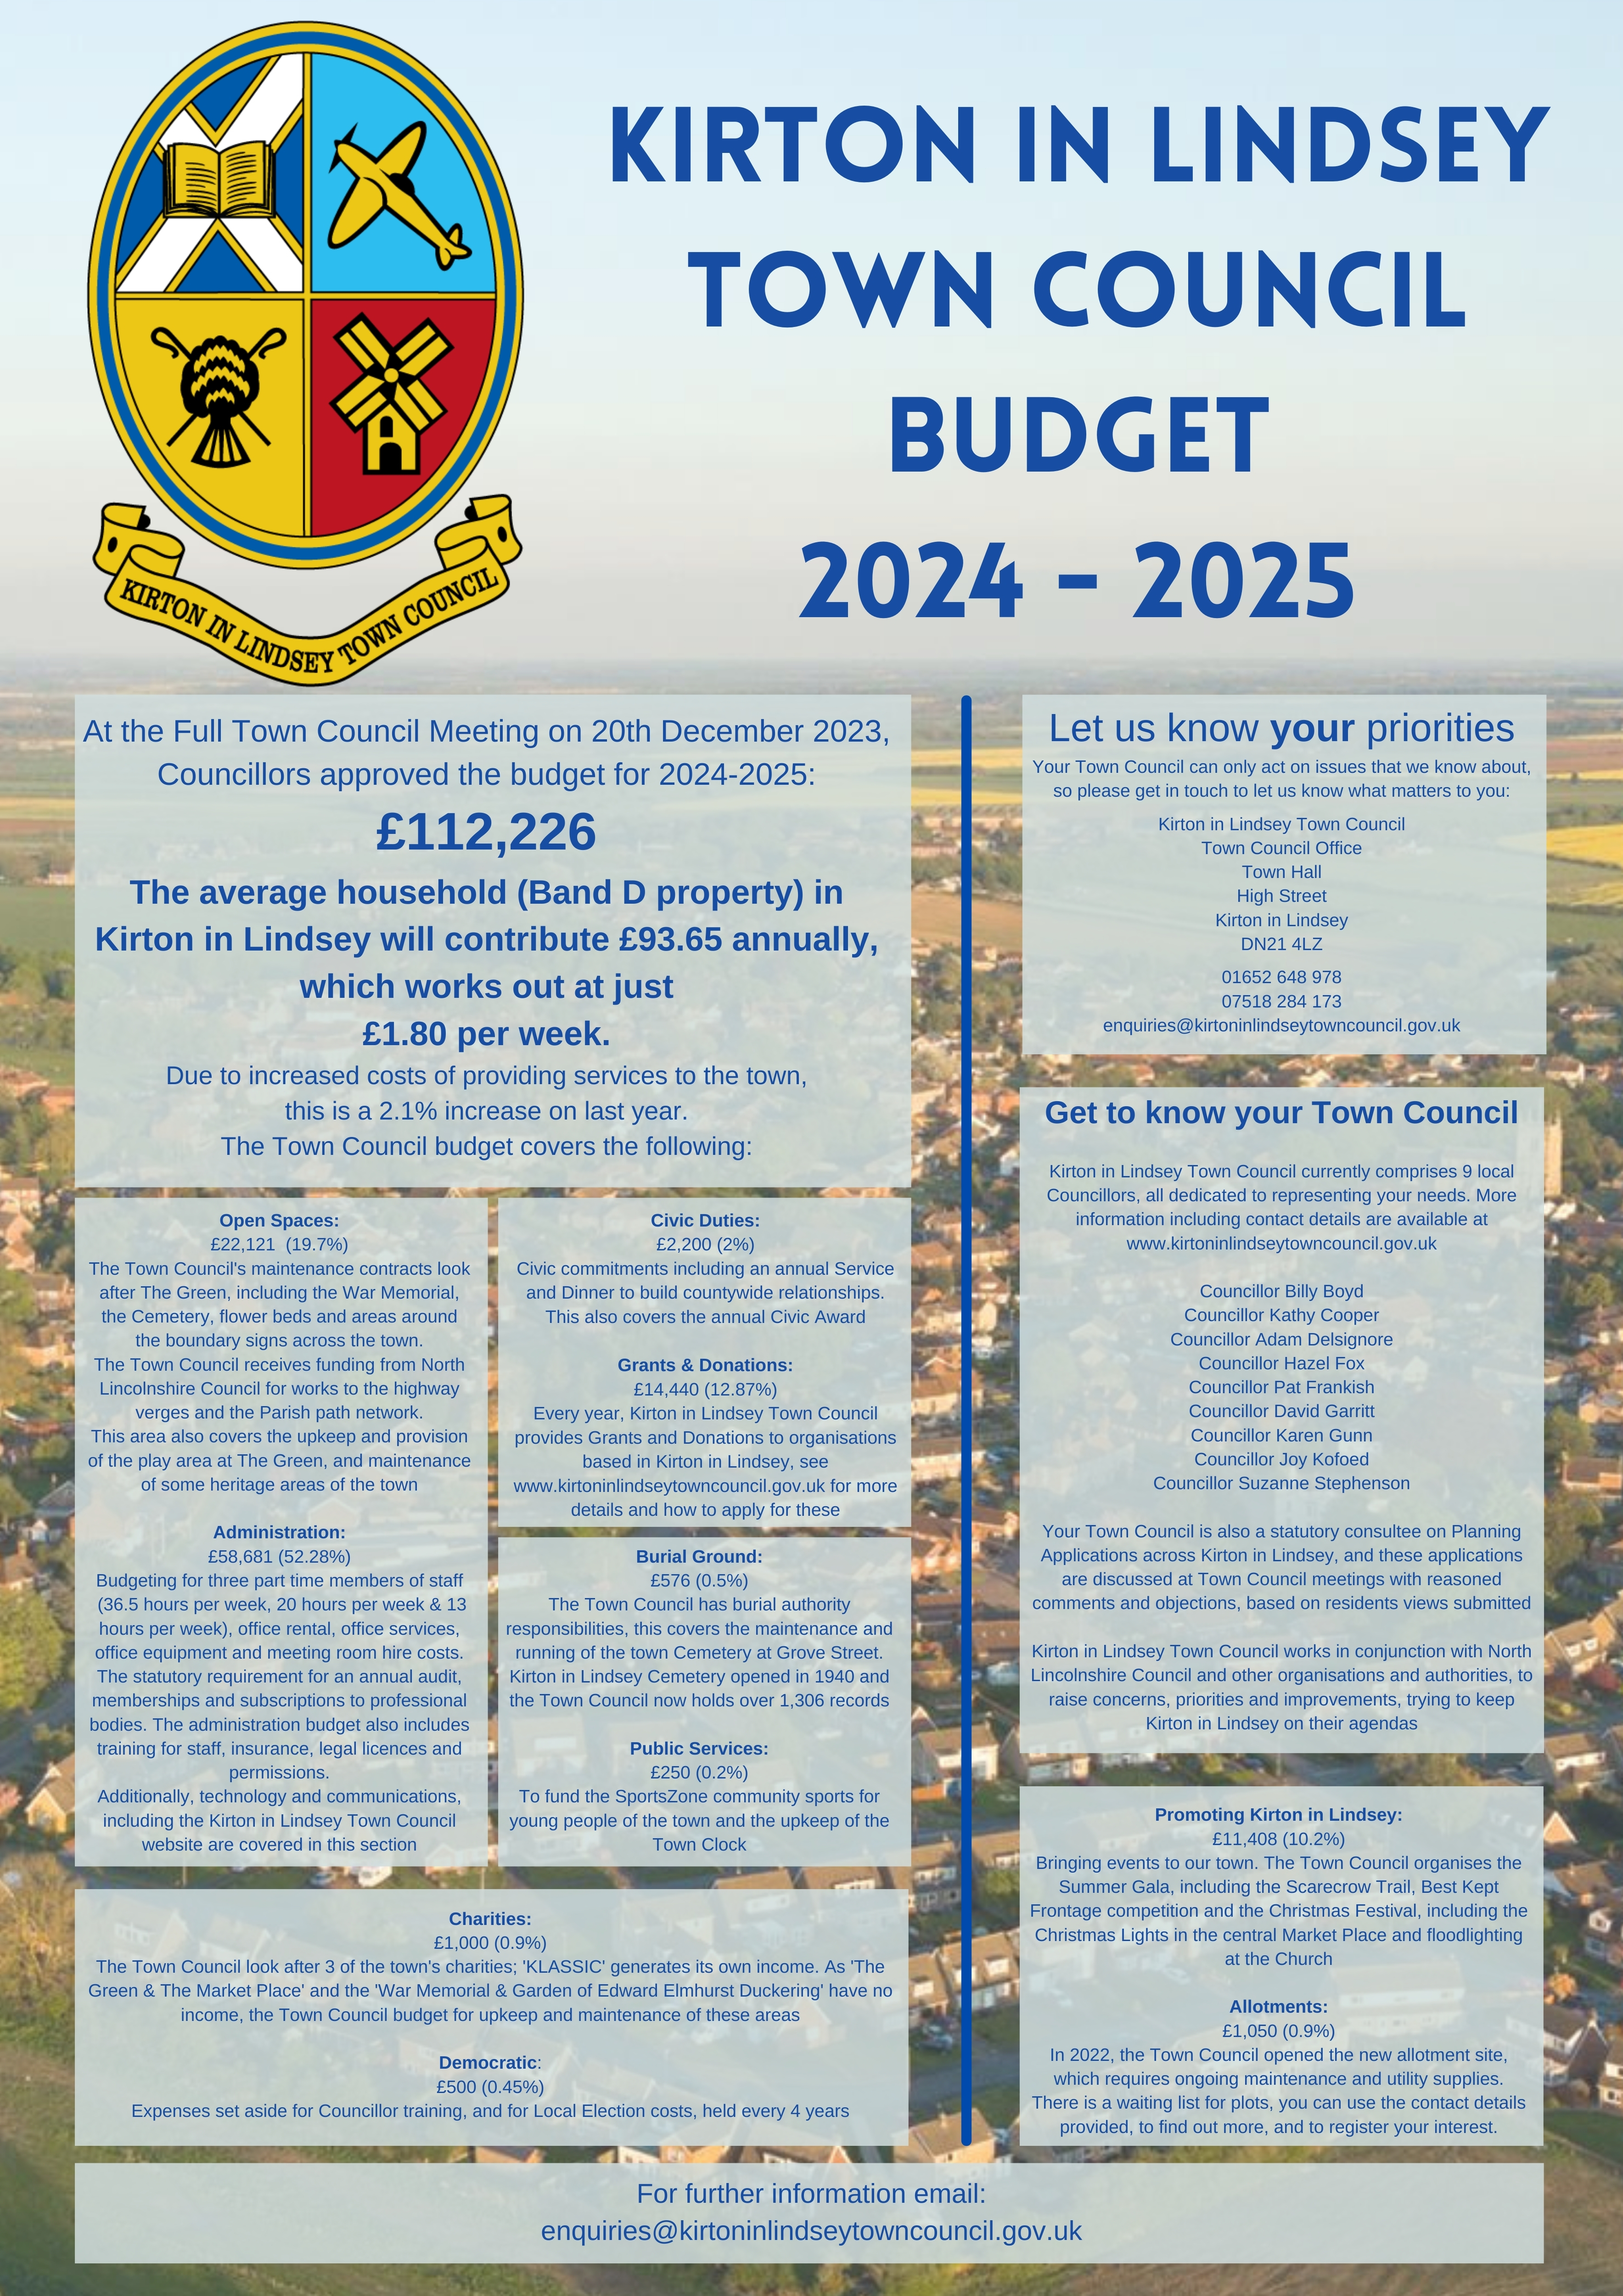 Kirton in Lindsey Town Council Budget 2024-2025